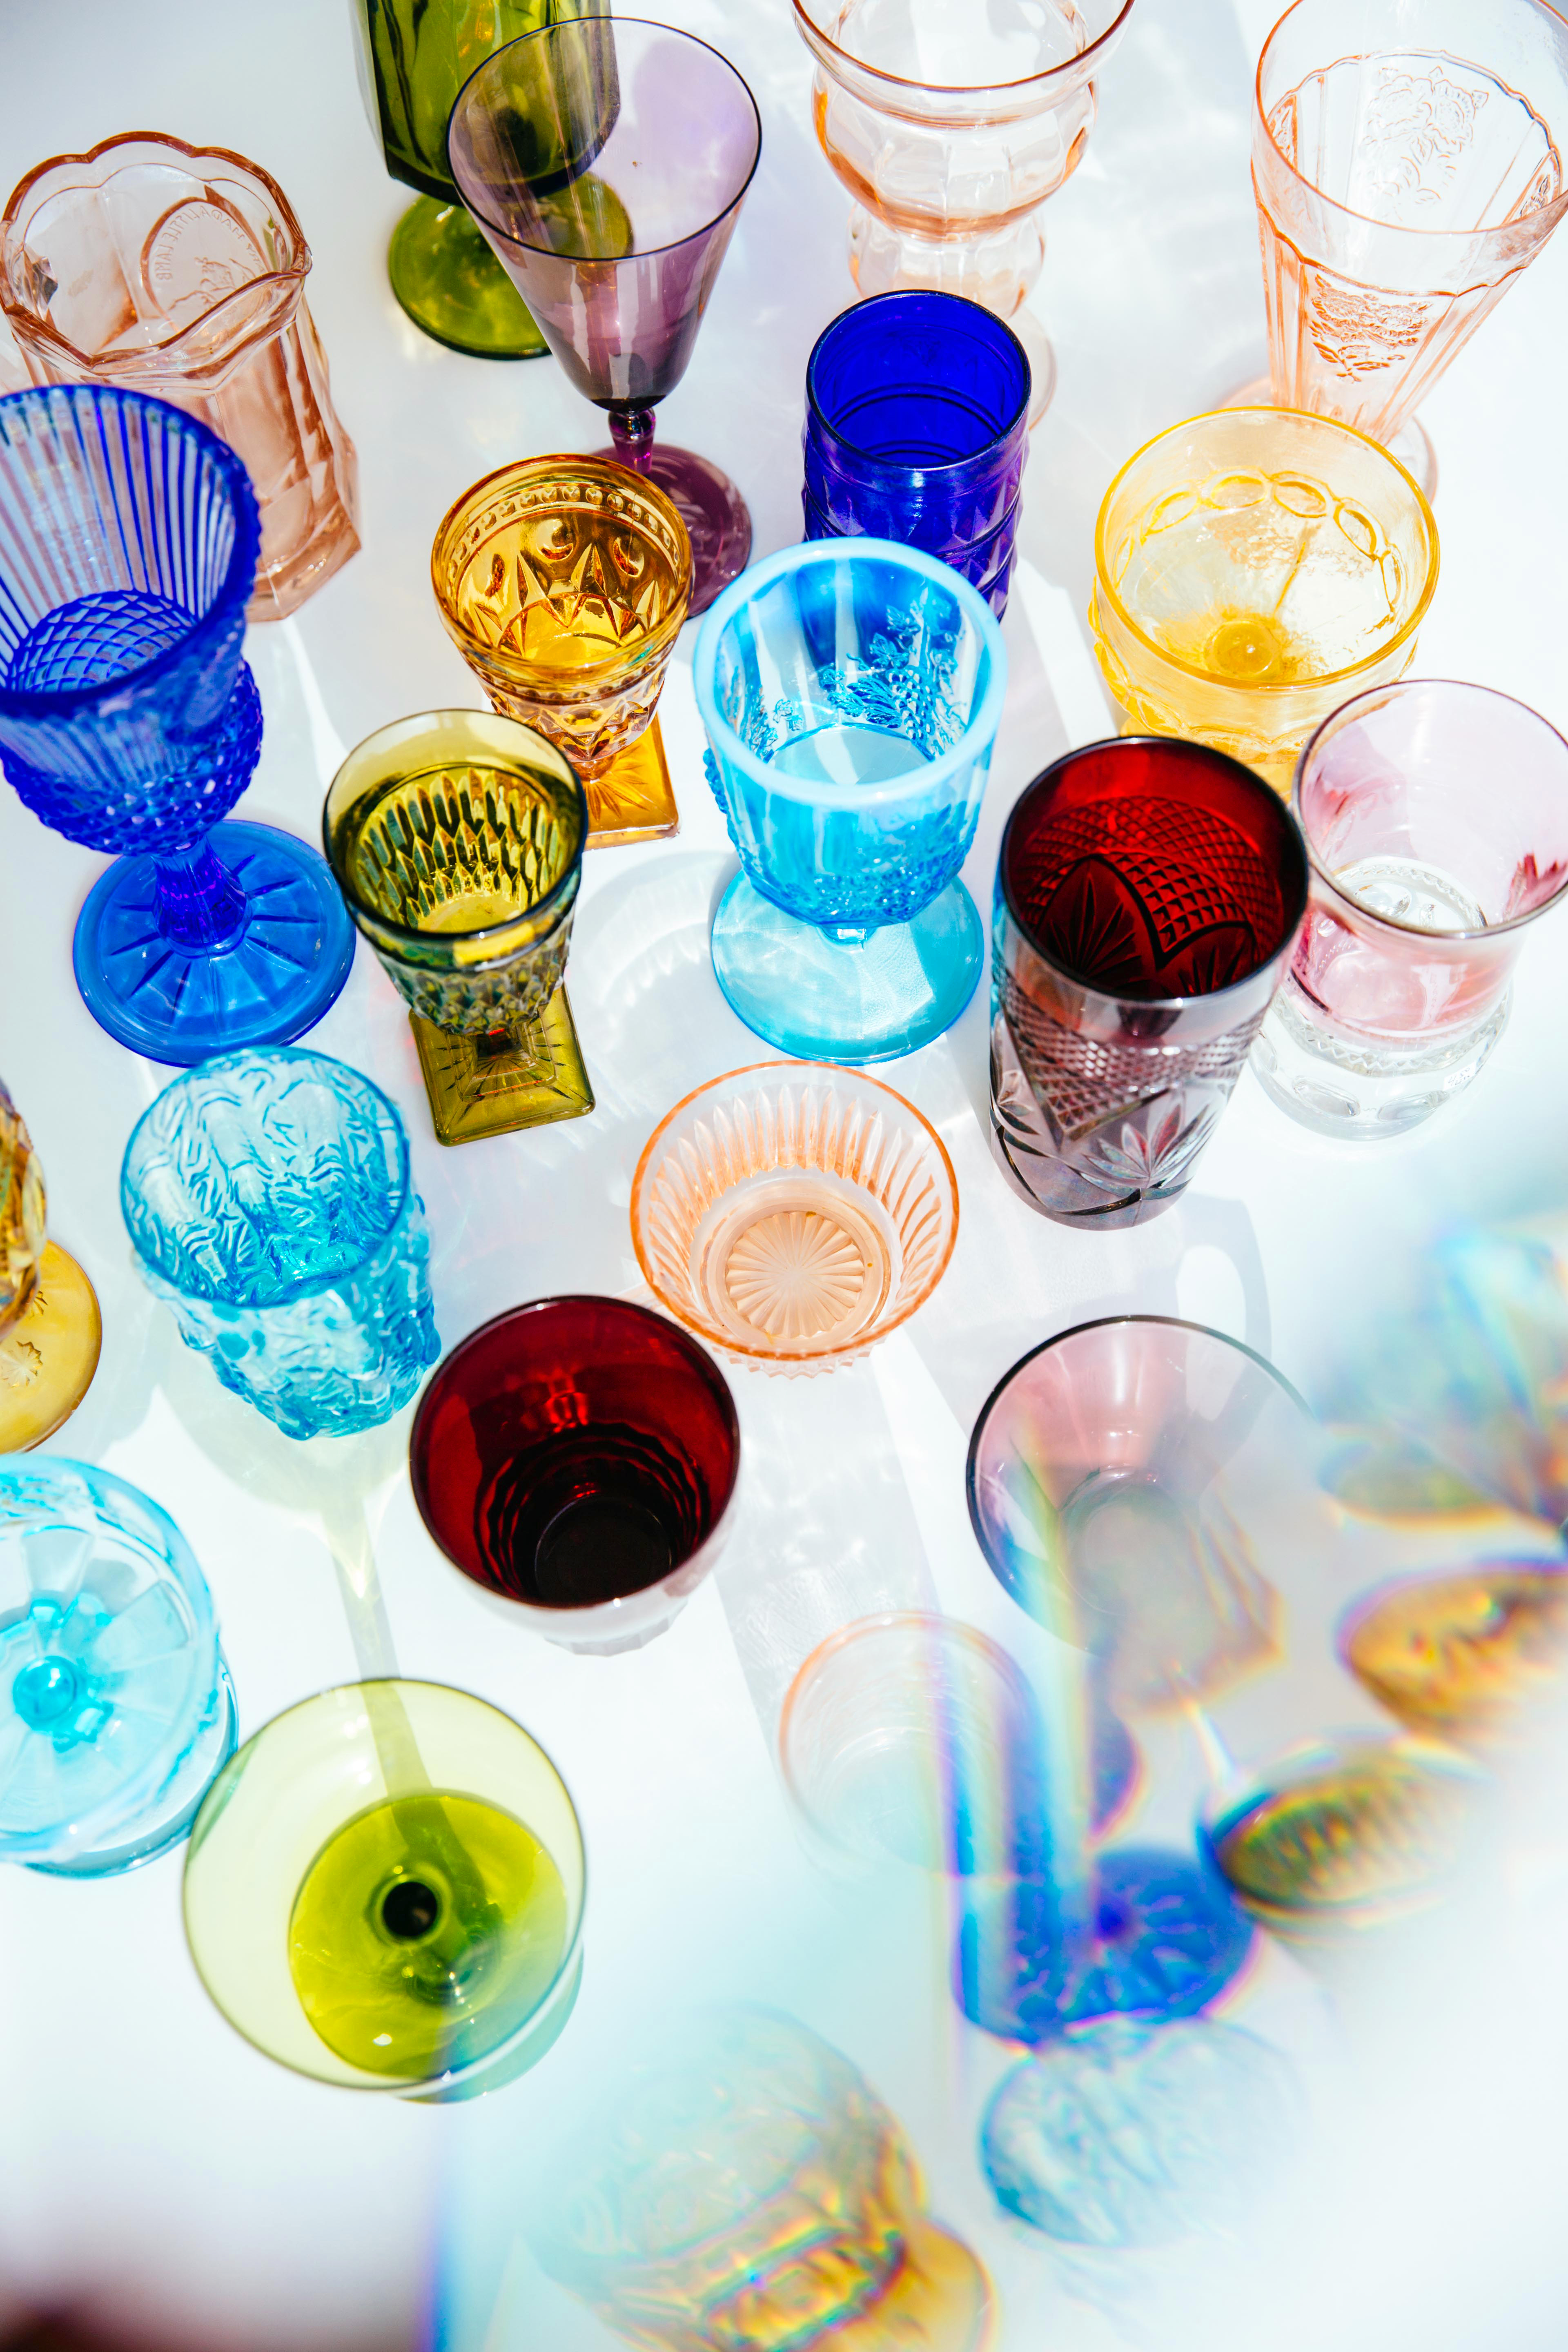 Start A Colored Glassware Collection By Treasure Hunting